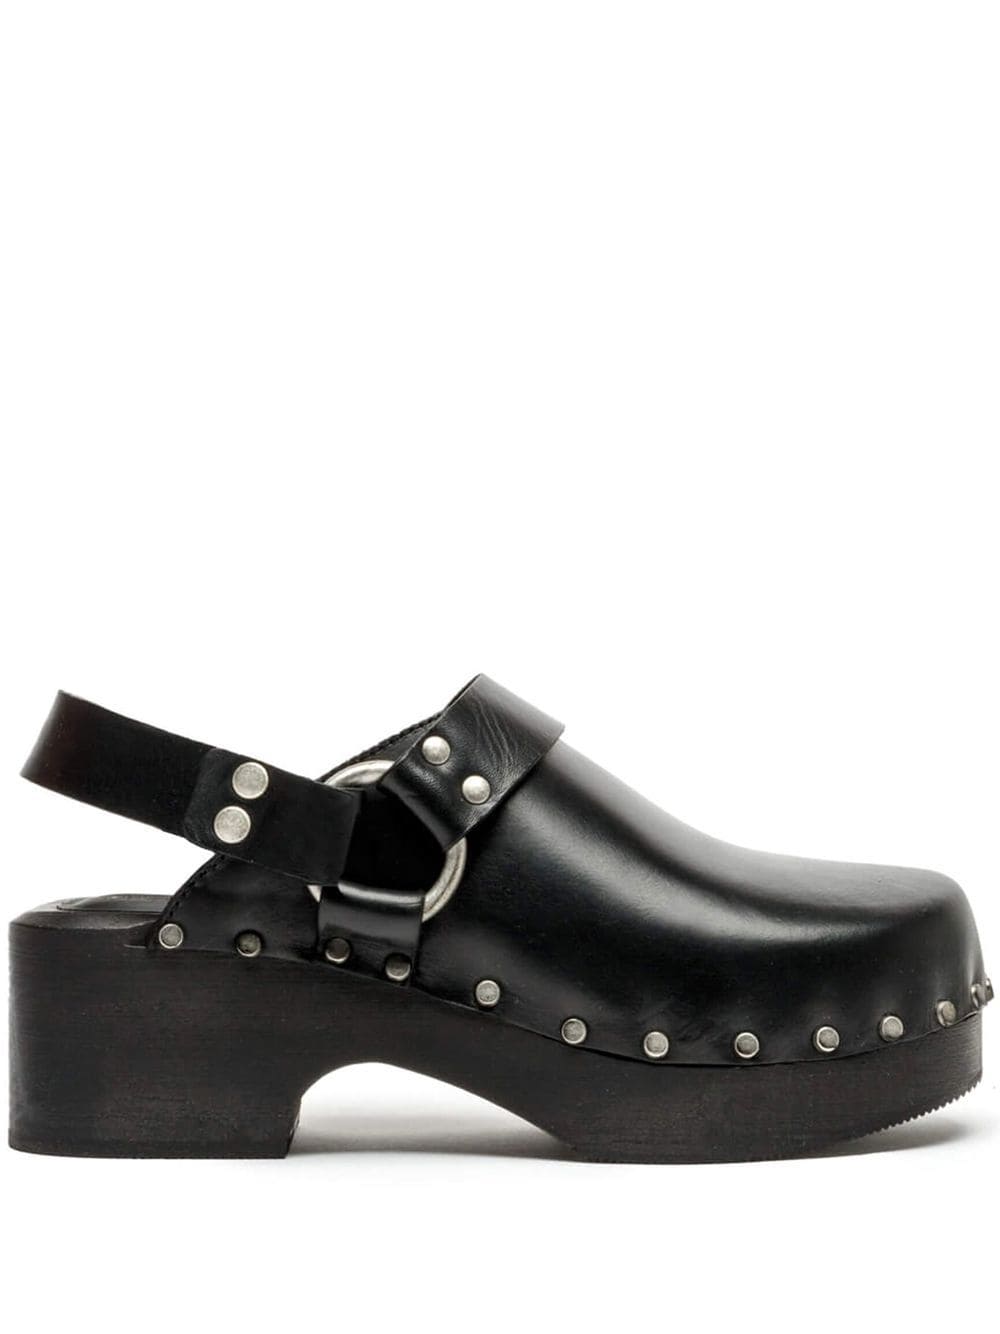 RE/DONE 70's stud-embellished mules - Black von RE/DONE